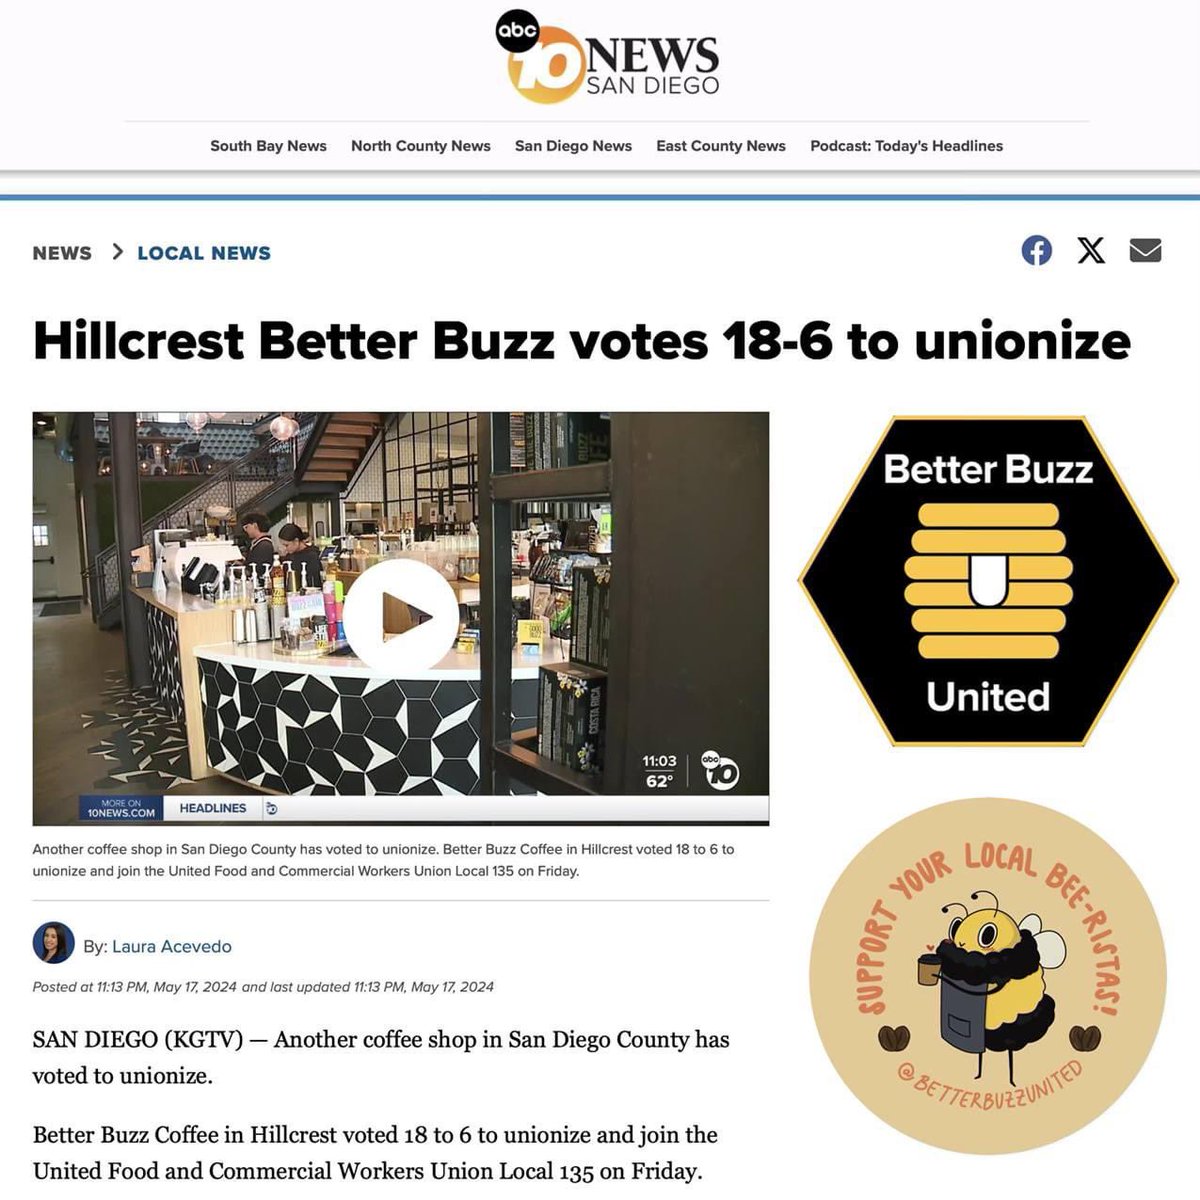 Better Buzz Coffee in Hillcrest voted 18 to 6 to unionize and join the United Food and Commercial Workers Union Local 135 on Friday. Read and watch it: 10news.com/news/local-new…